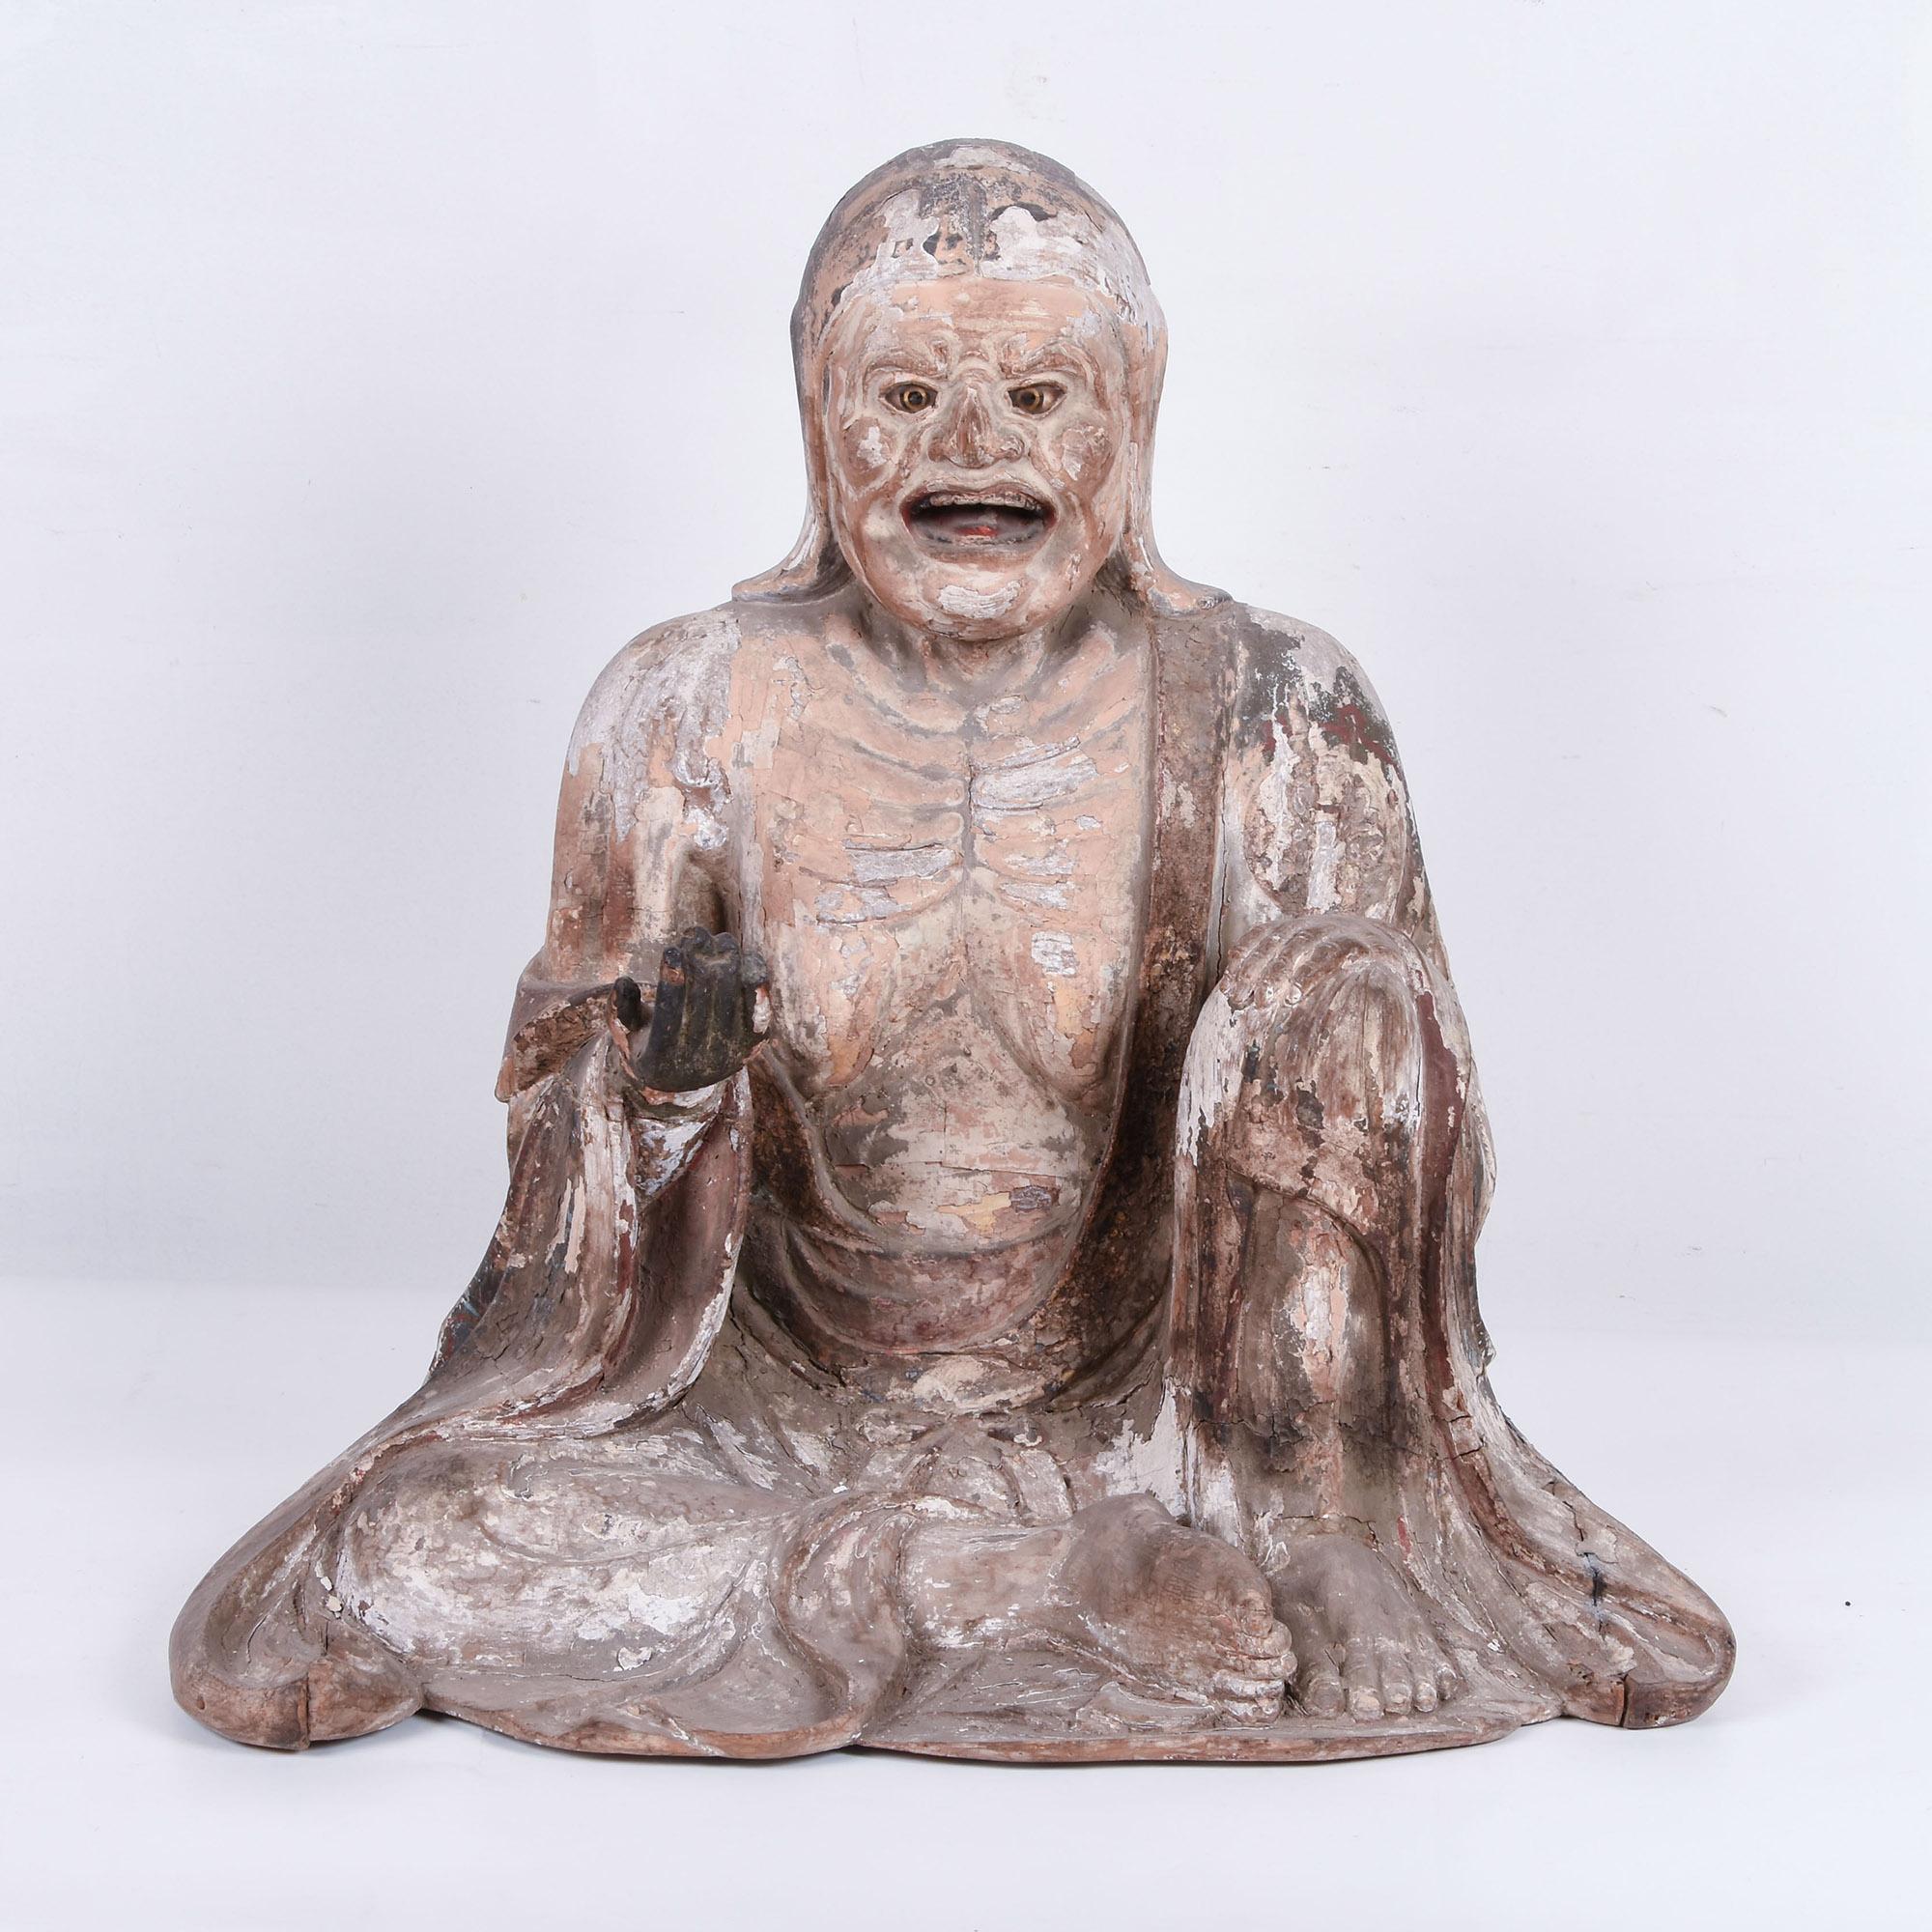 Japanese statue of Datsue-ba also known as Shozuka no Baba, Kamakura- Muromachi period.

Antique Japanese statue of Datsue-ba or Shozuka no Baba, Kamakura-Muromachi period, circa 14th century. The figure is carved of Hinoke (Cypress) and layers of